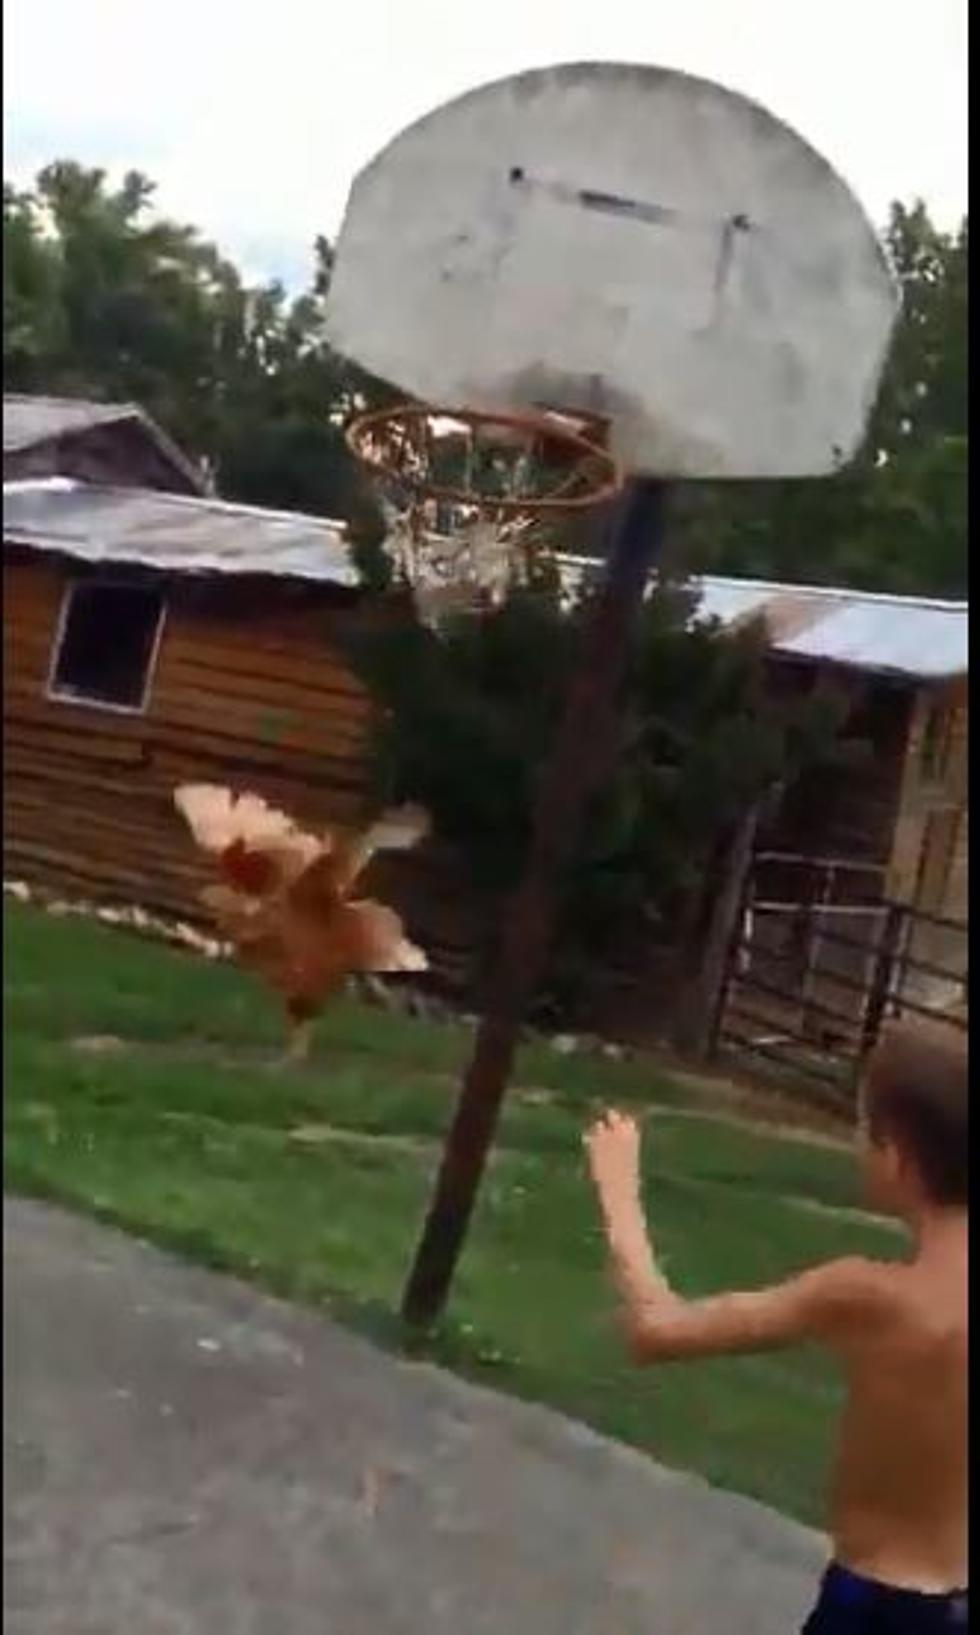 This Shirtless Kid Tosses a Live Chicken Through a Basketball Hoop [VIDEO]